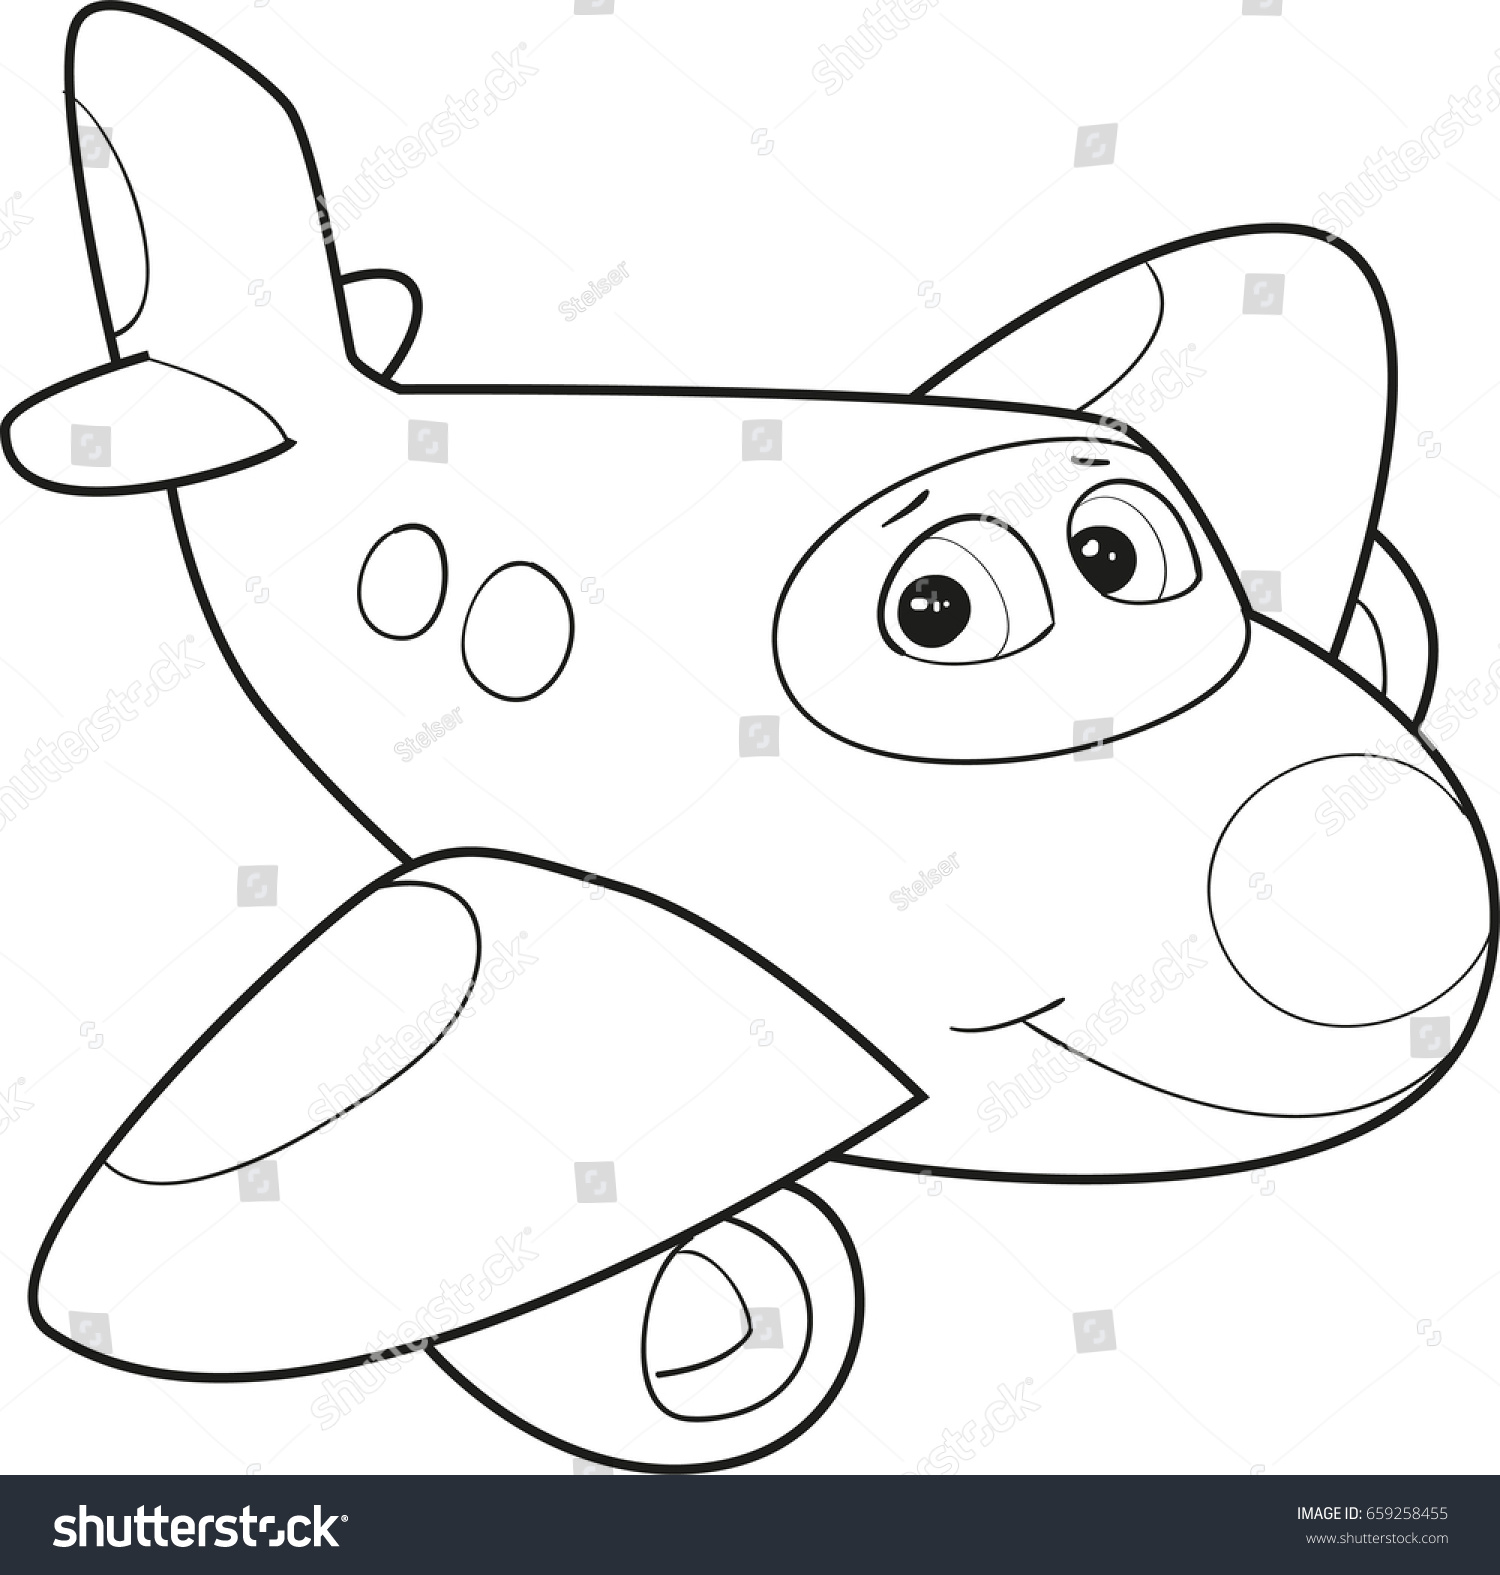 Coloring Page Outline Cartoon Smiling Airplane Stock Vector 659258455